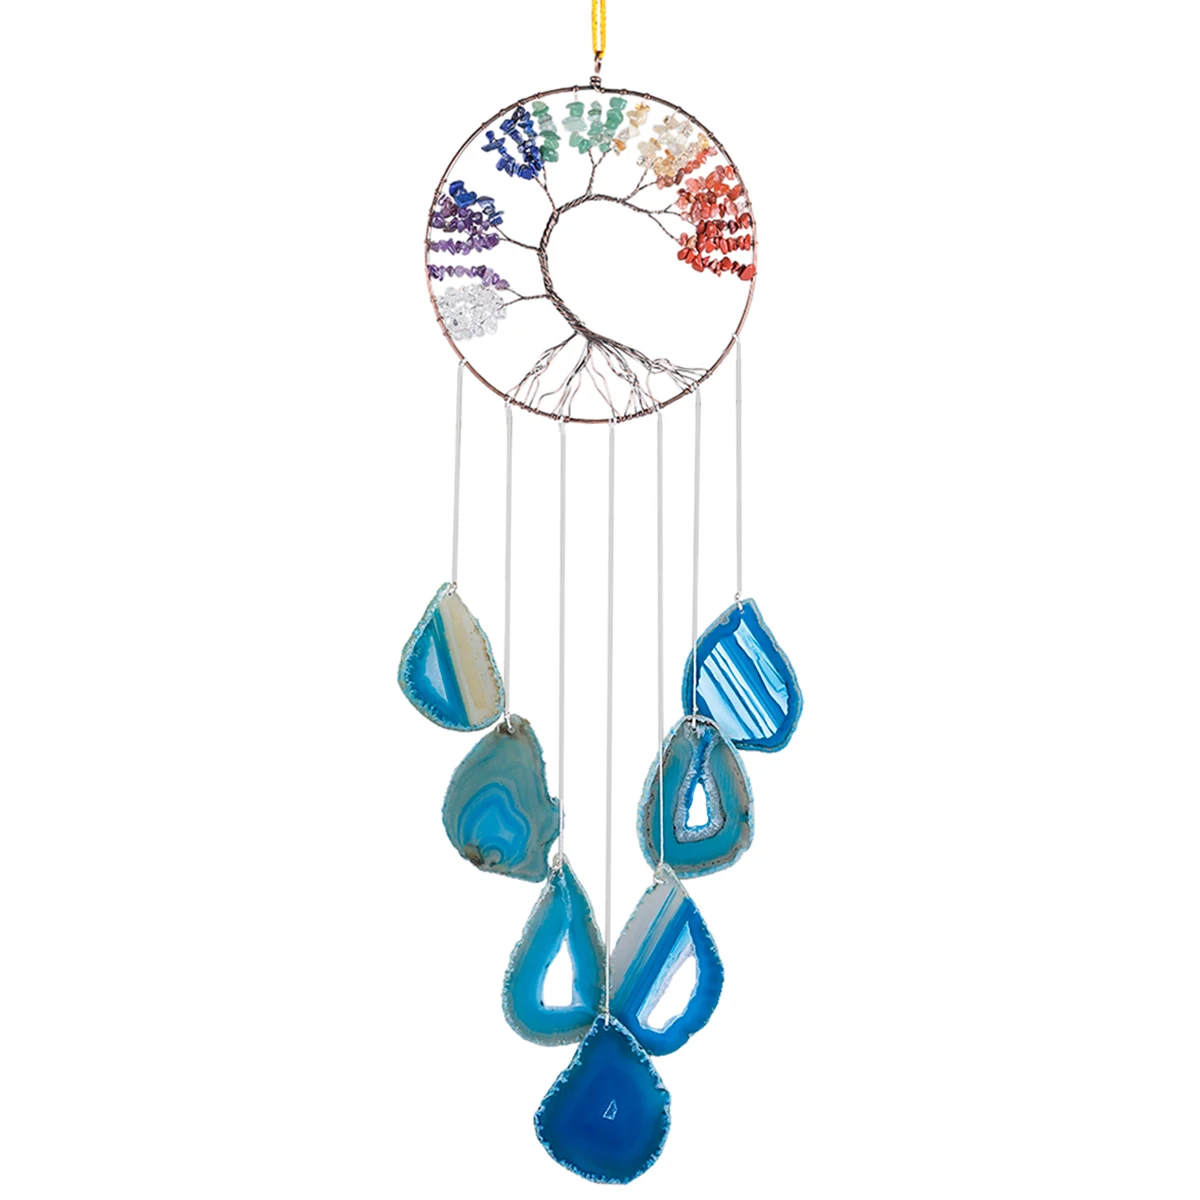 Natural Crystal Stone Wind Chime Tree Of Life 7 Chakra Healing Slices Agate Handmade Wall Hanging Ornaments Home Decoration Gift natural crystal stone wind chime tree of life 7 chakra healing slices agate handmade wall hanging ornaments home decoration gift